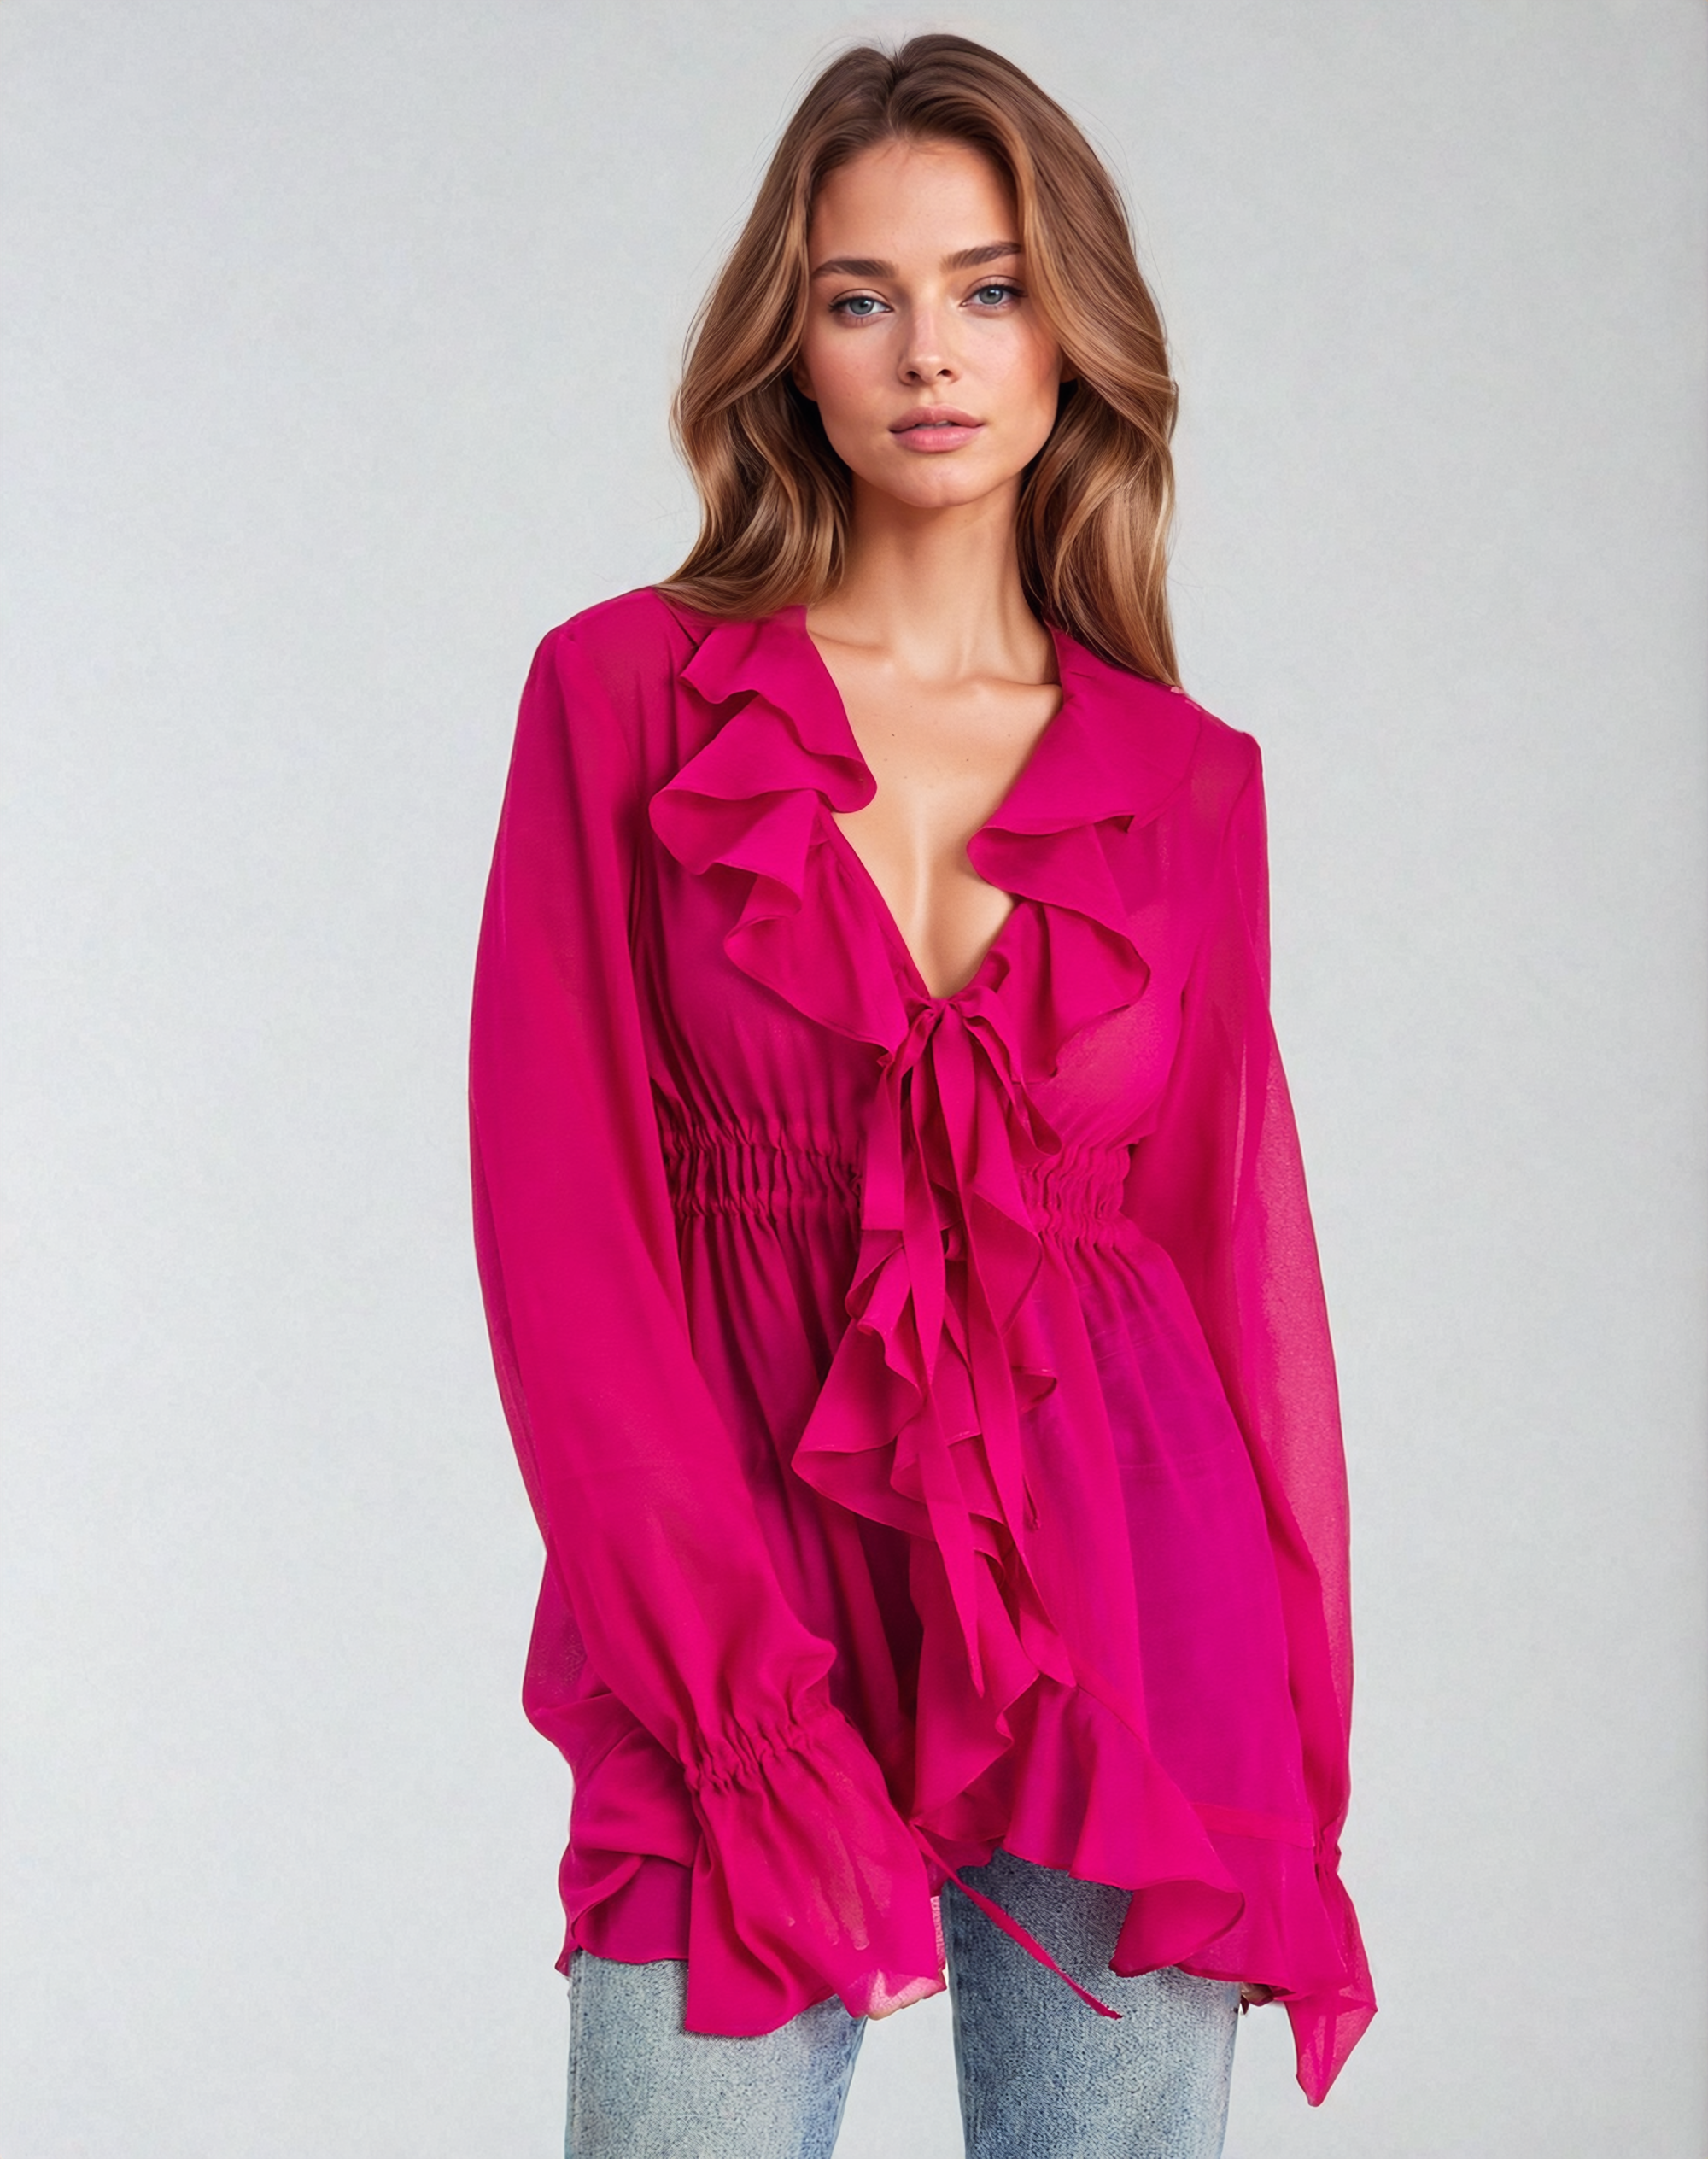 Ruffled Elegance A-Line Blouse with Deep V-Neck, Bias Binding, and Stylish Ties